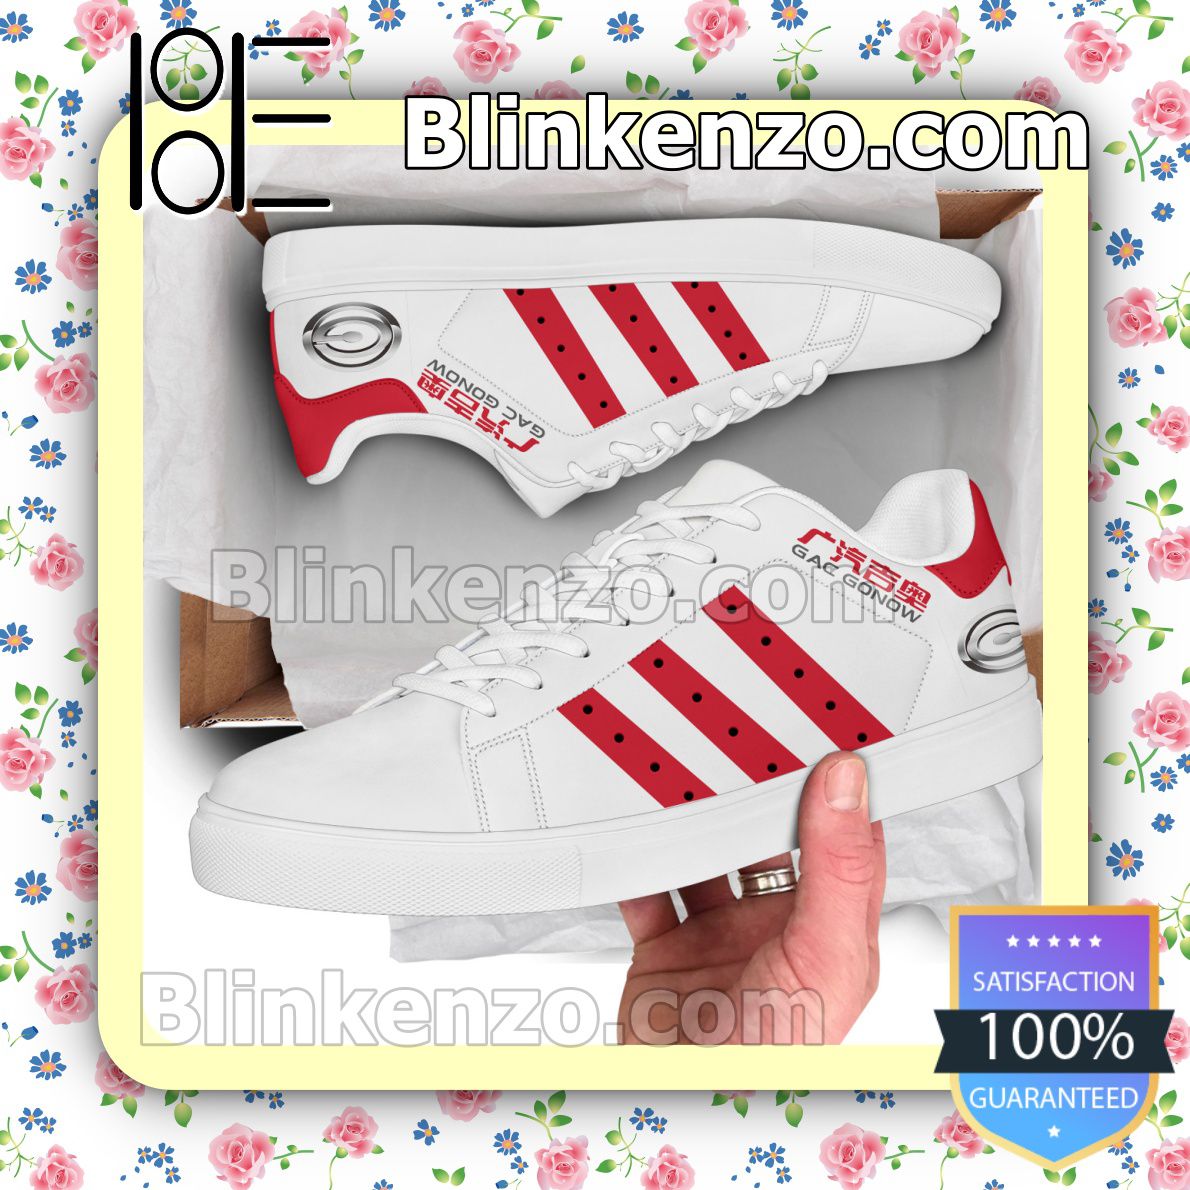 Gonow Logo Brand Adidas Low Top Shoes